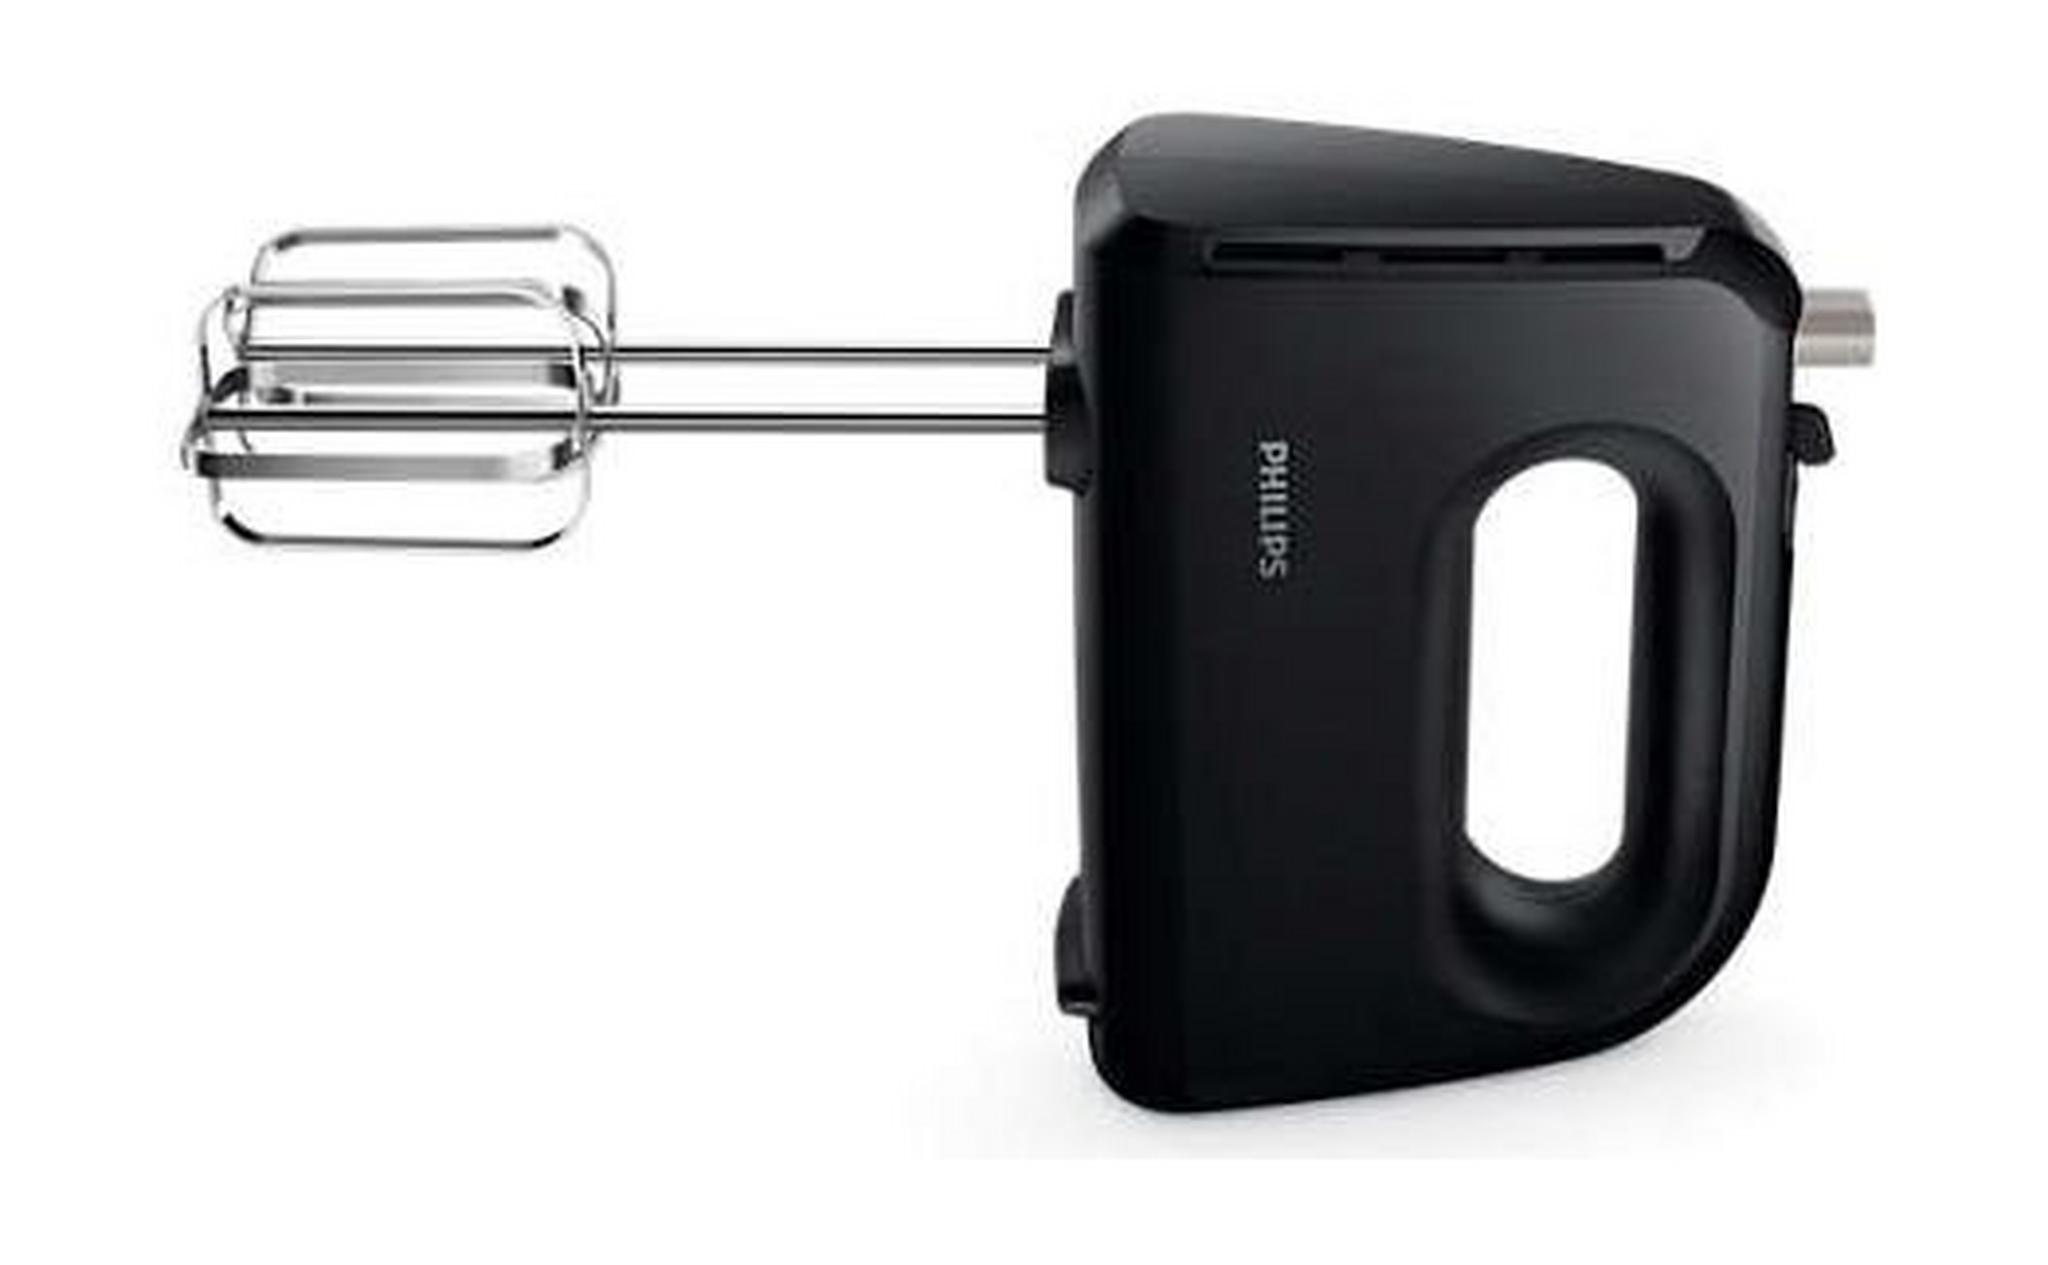 Philips Daily Collection Hand Mixer, 280W, HR3704/11 - Black